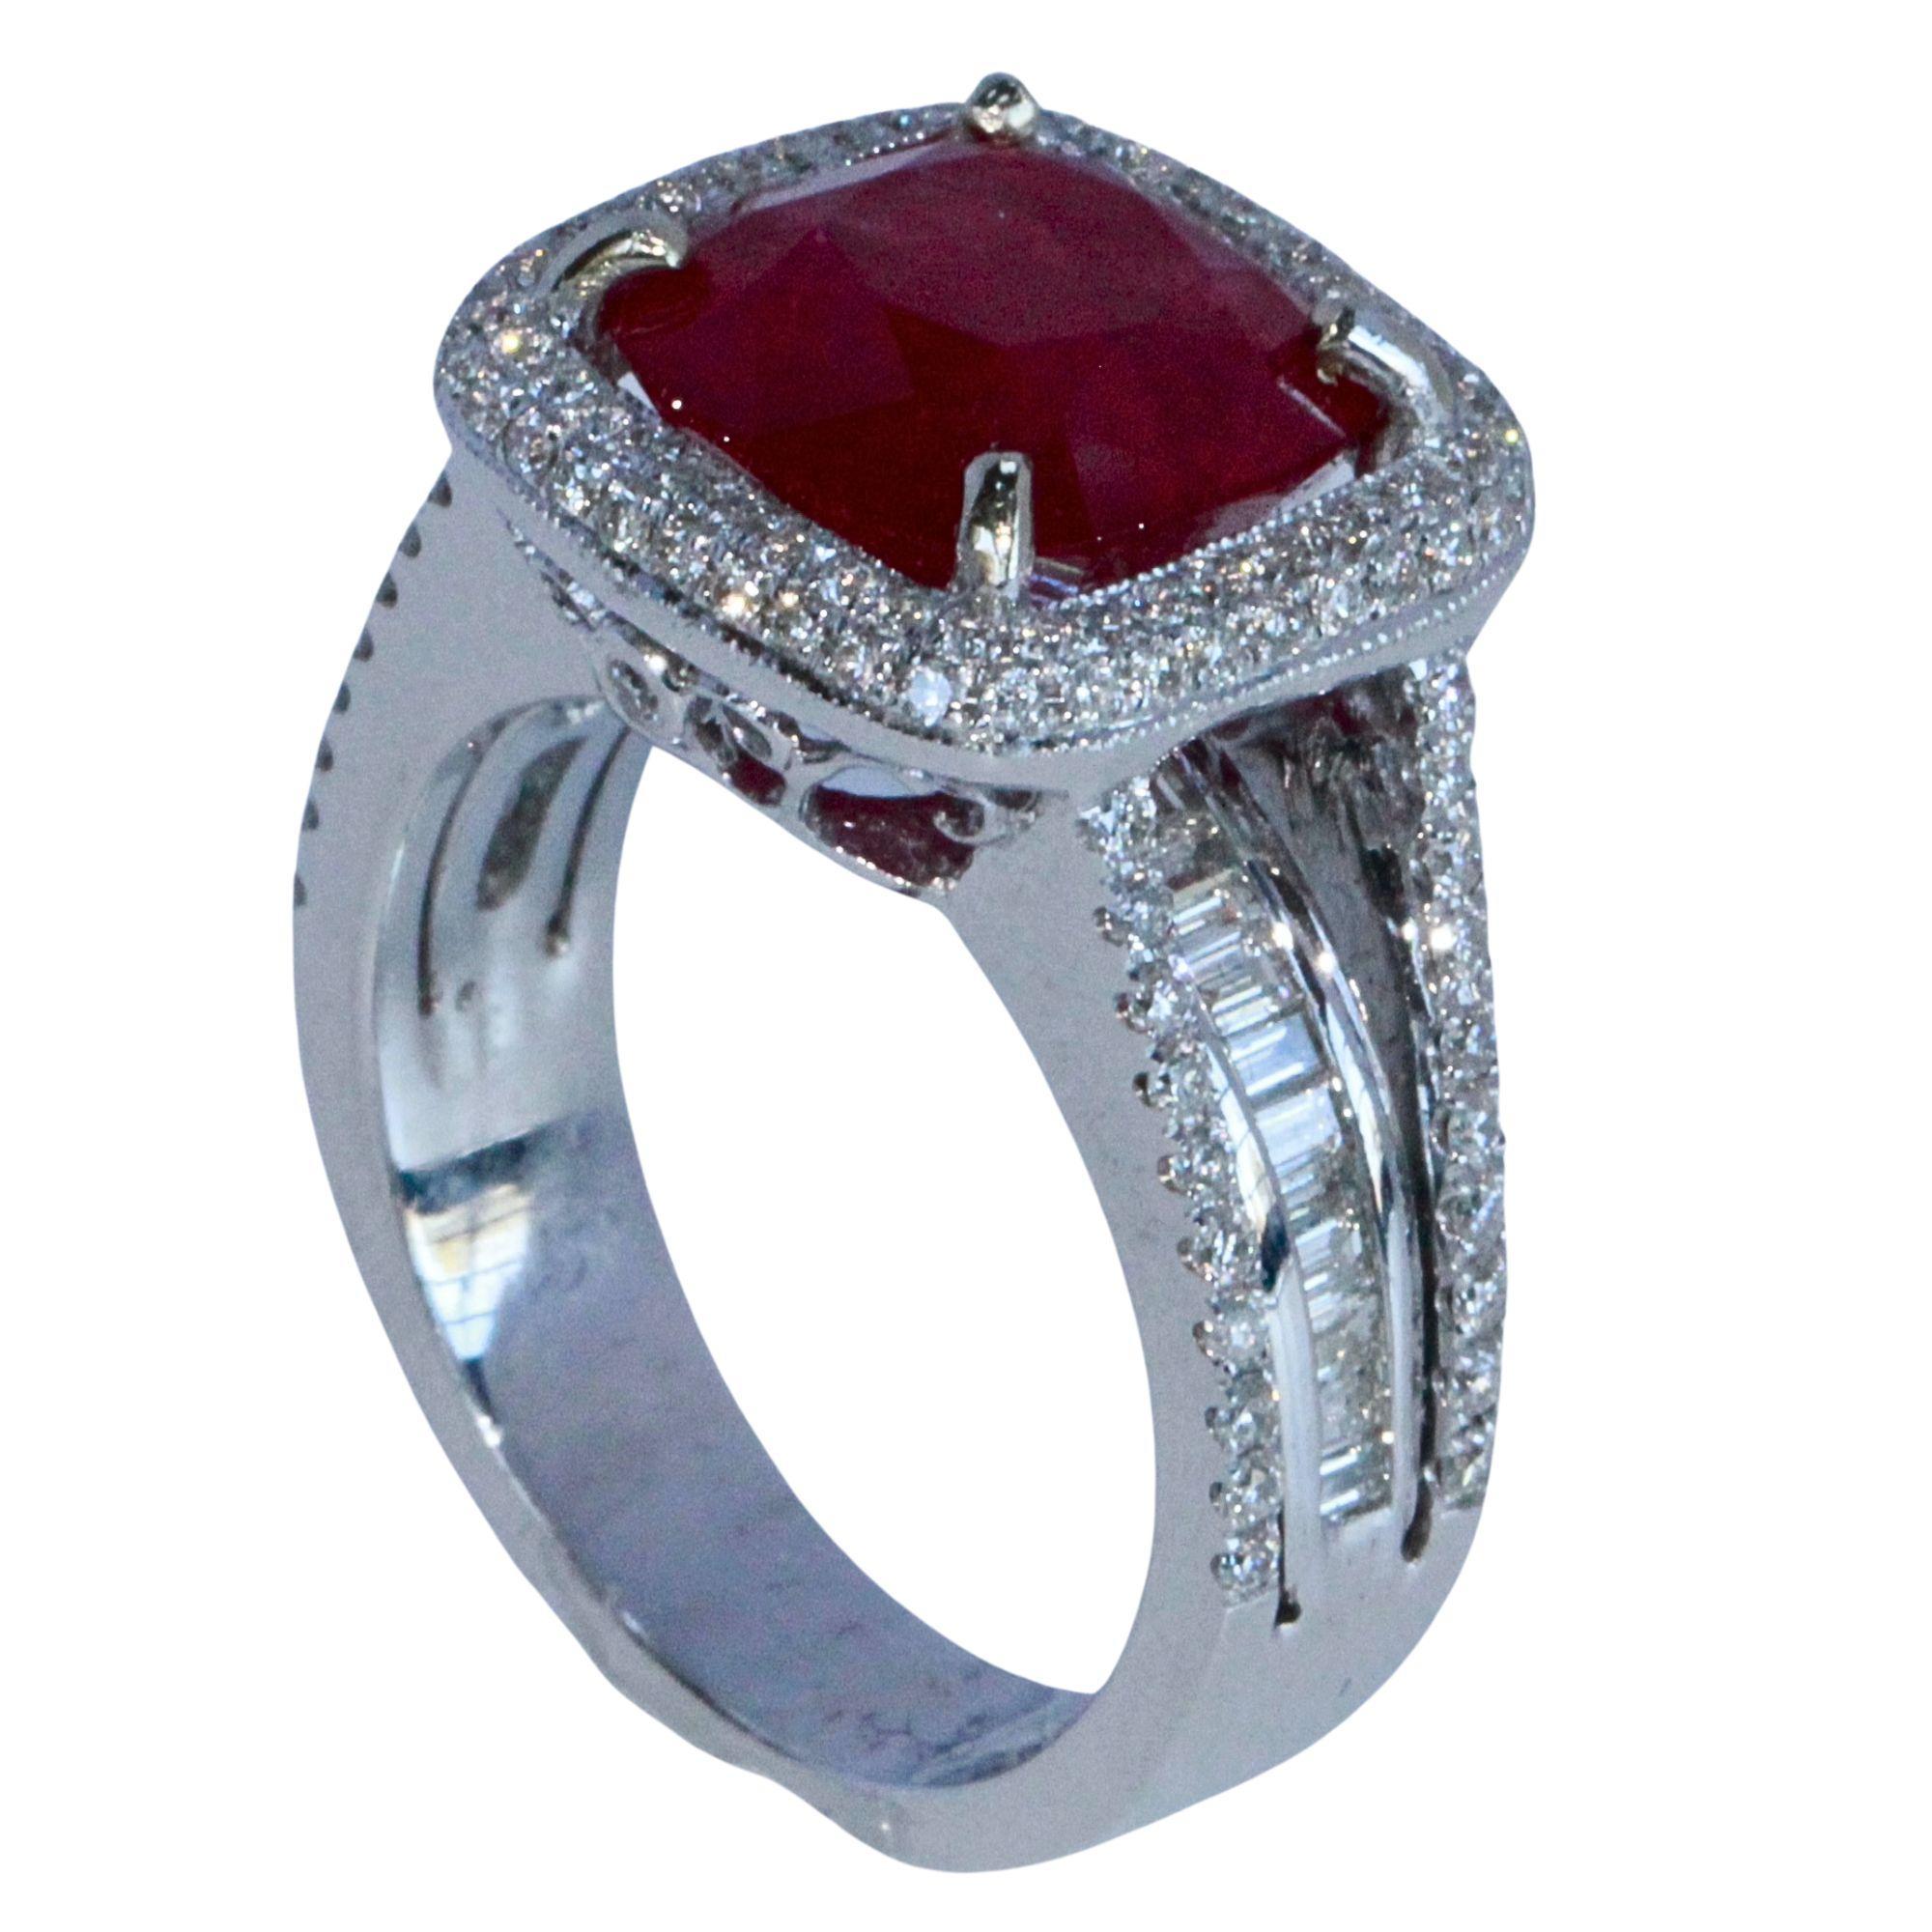 Indulge in luxury with our 18k Diamond and Ruby Ring. Crafted from white gold, this exquisite piece features 1.12 carats of diamonds and a 5.49 carats ruby center. In excellent condition and adorned with markings, this ring is a true statement of